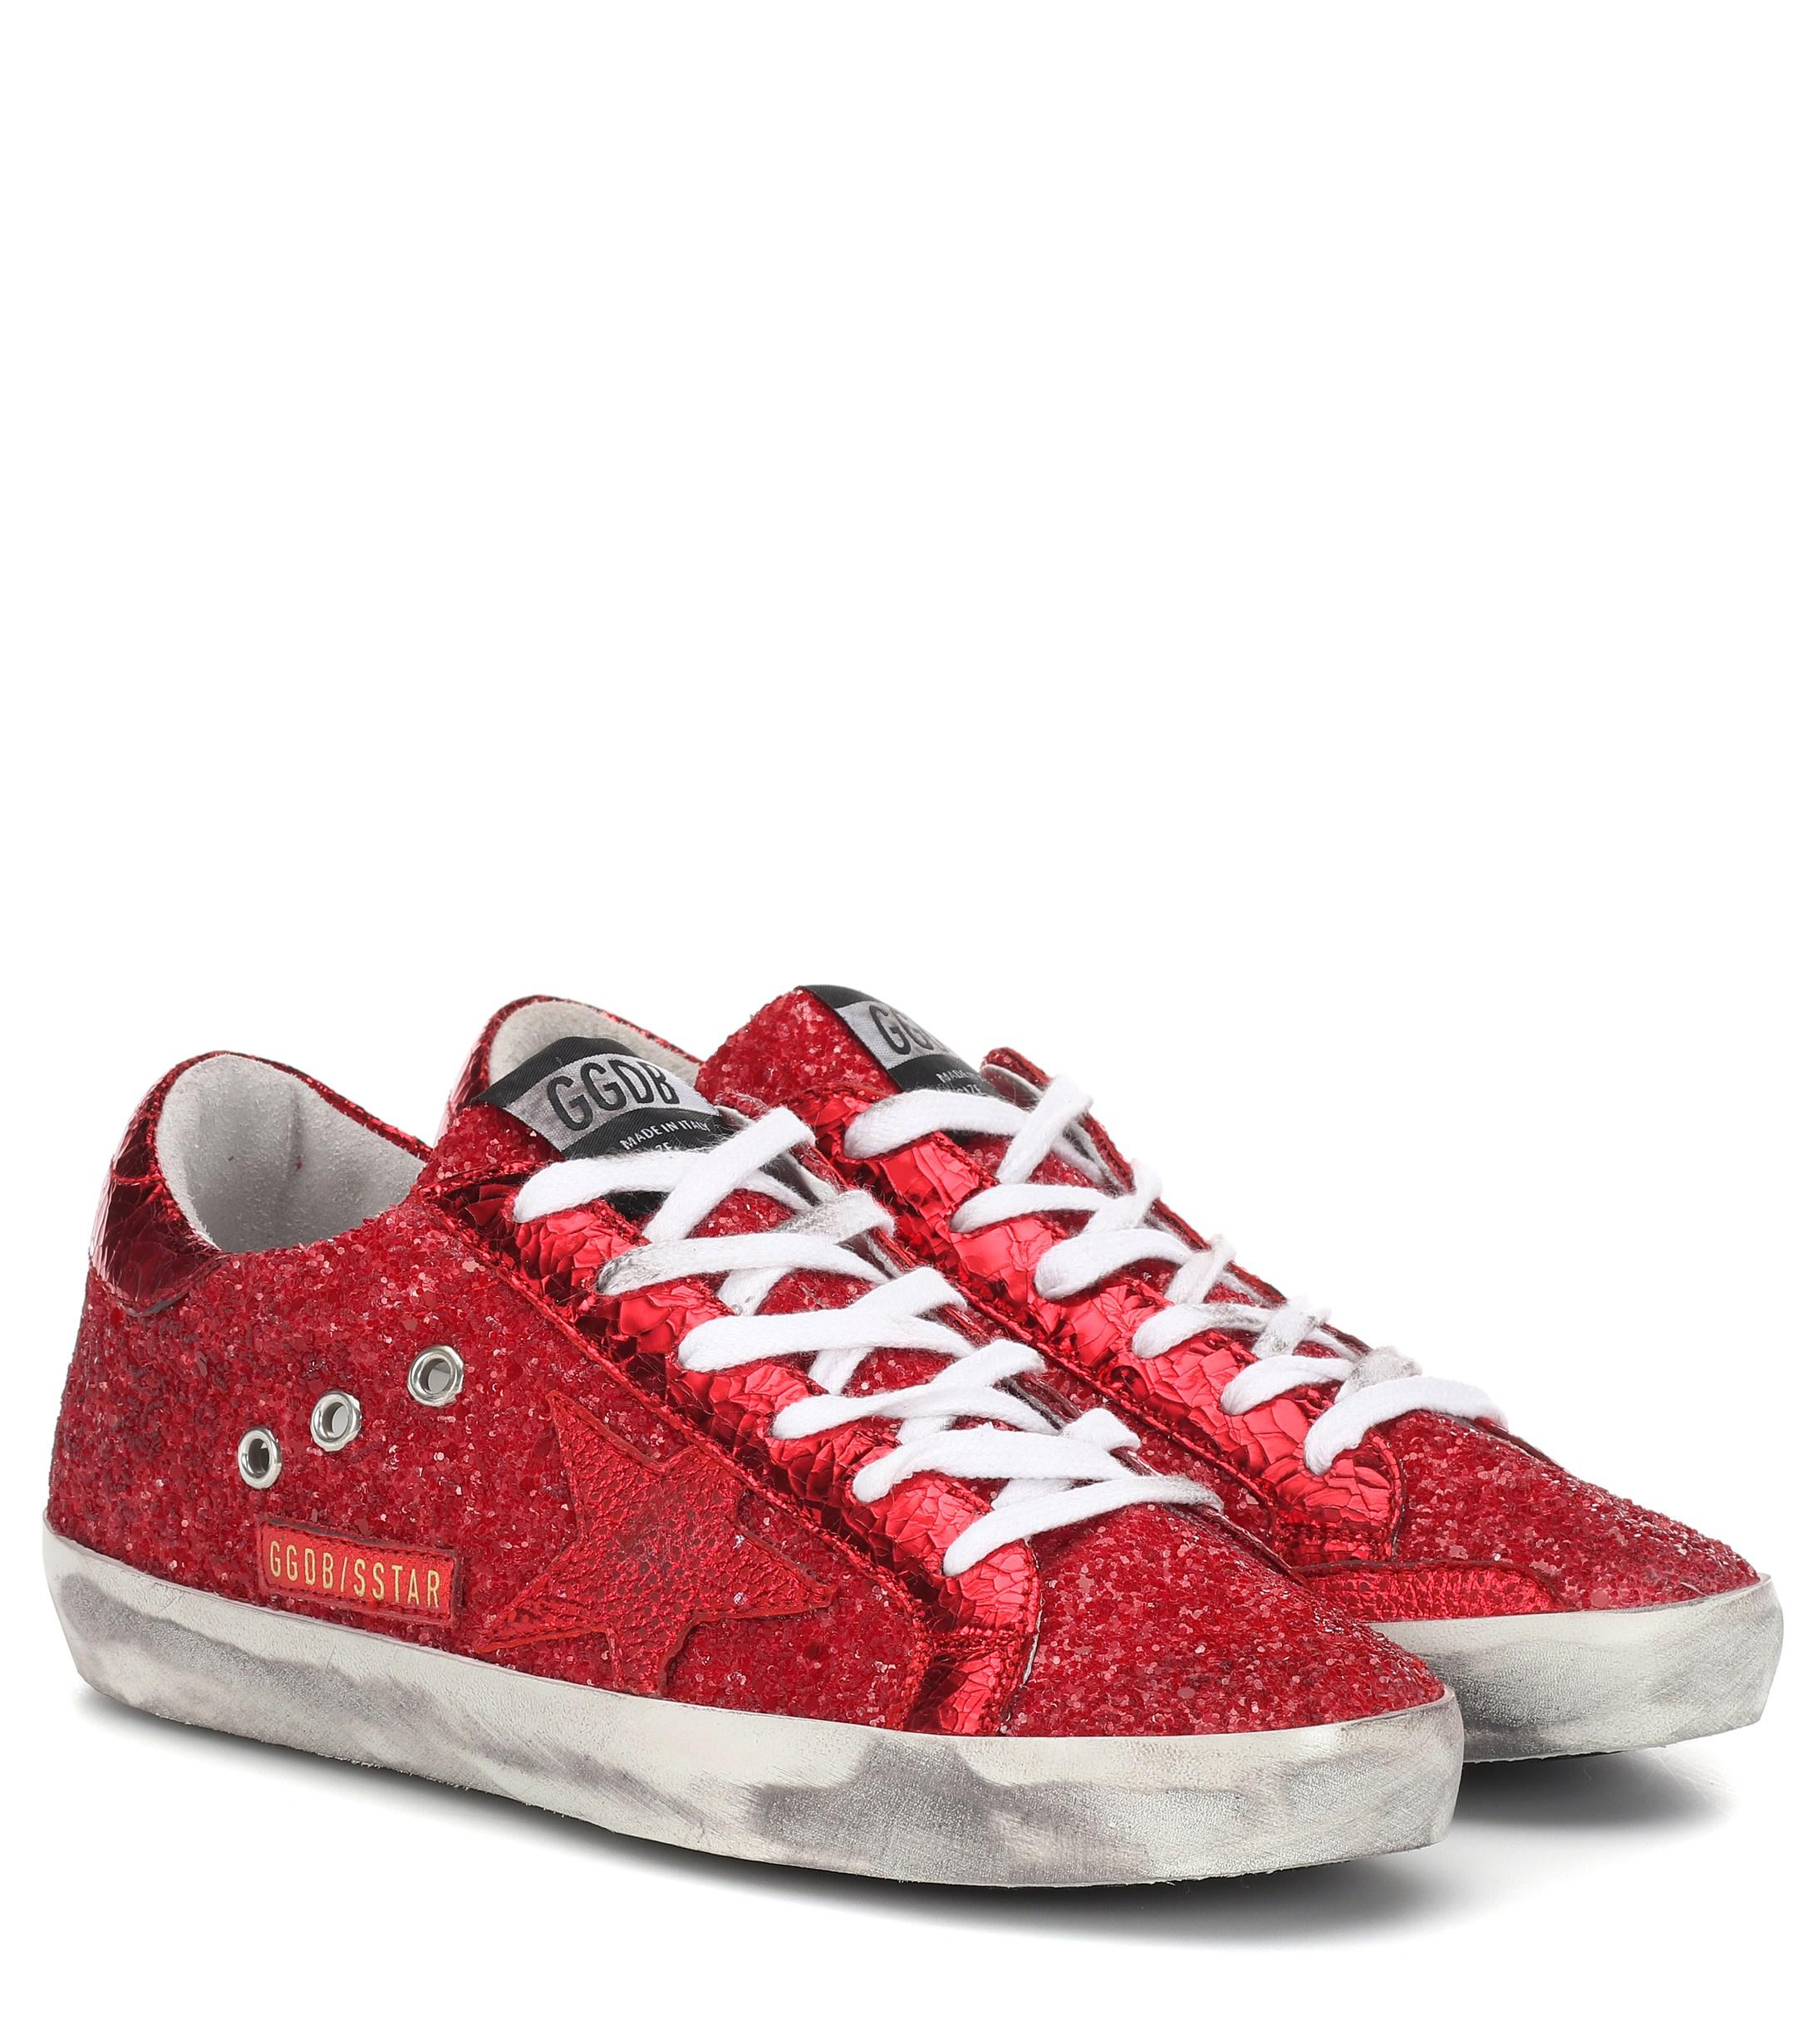 golden goose sneakers sparkly online sales,Up To OFF59%